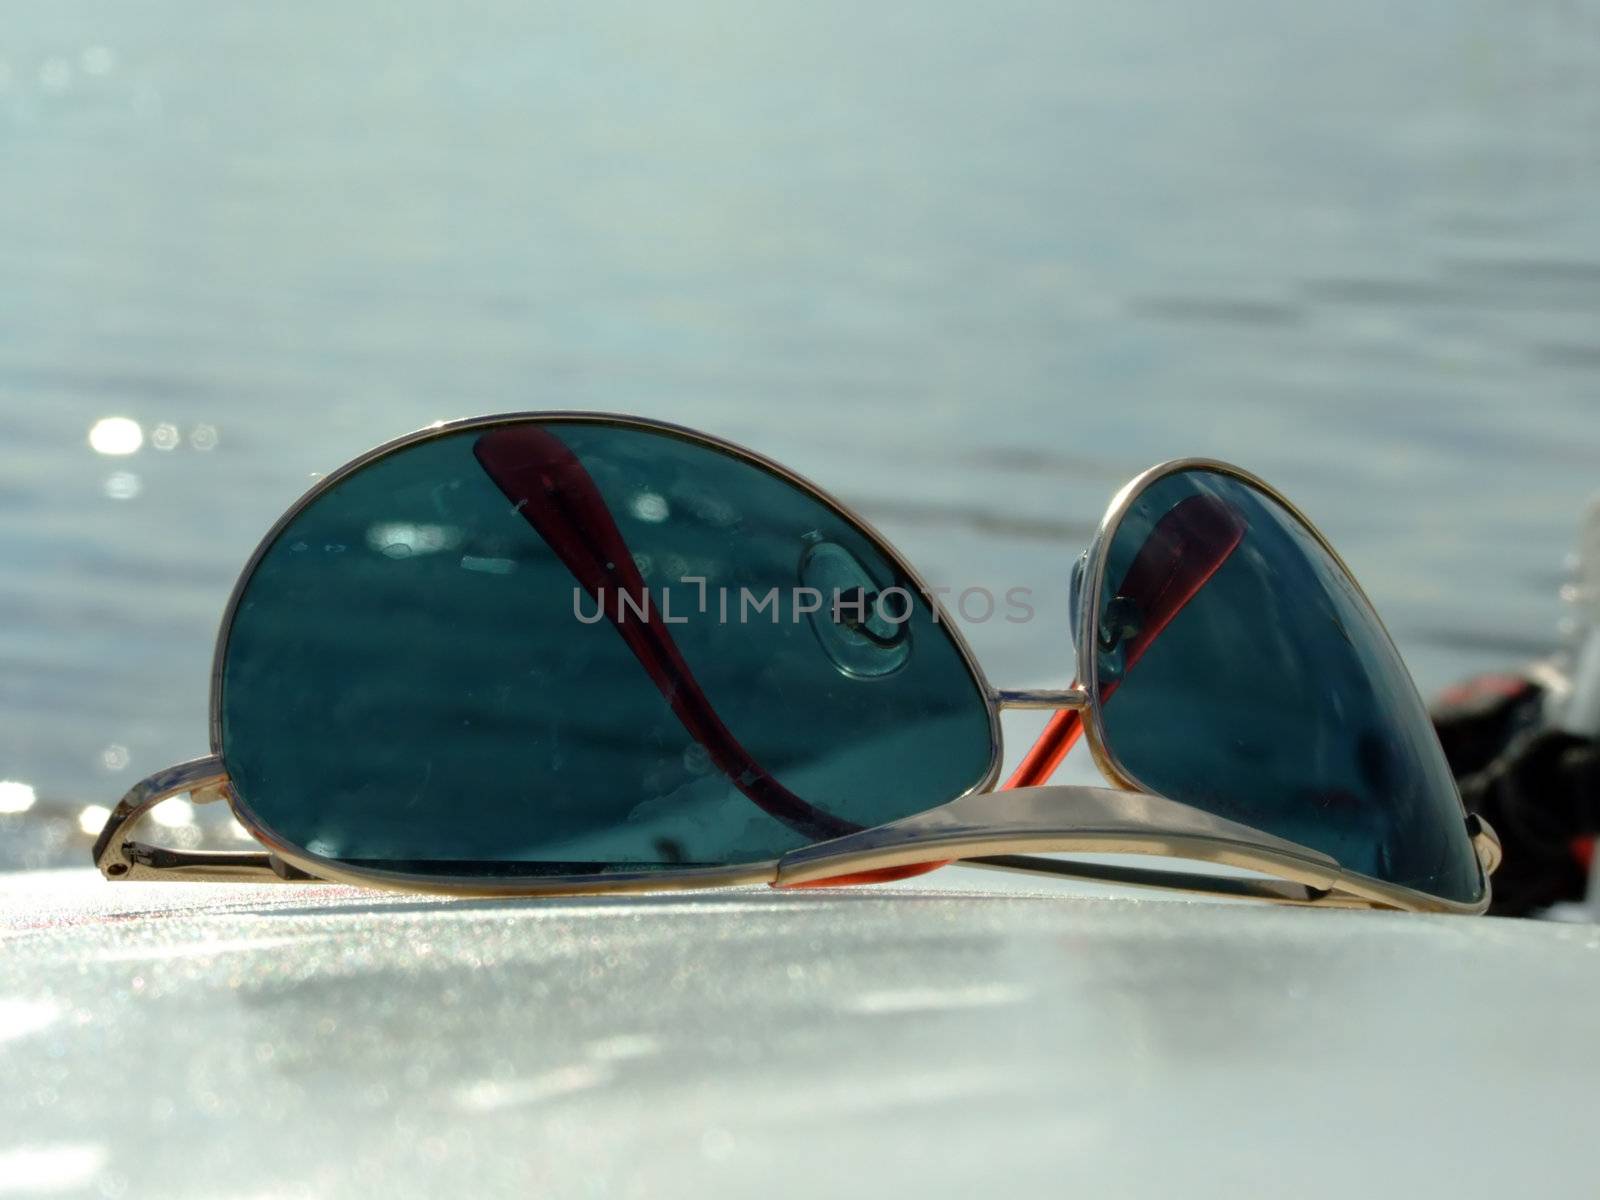 The sunglasses laying on a white surface on a background of wate by acidgrey